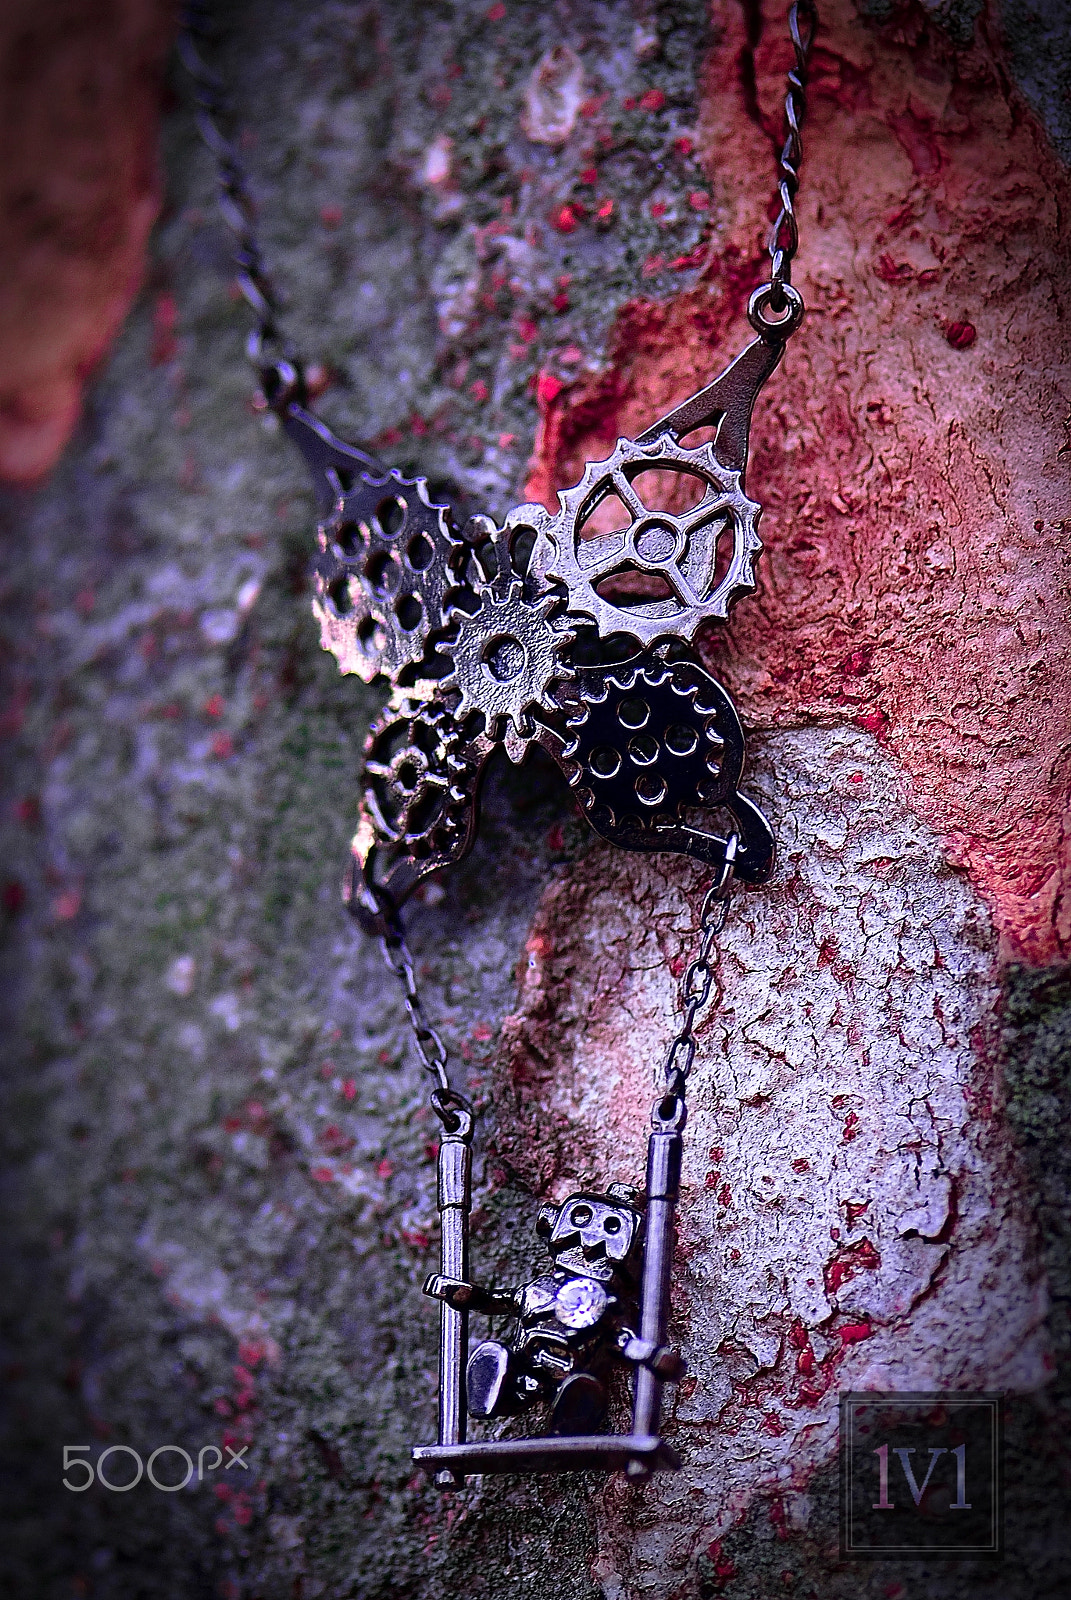 Nikon D200 + Nikon AF-S Micro-Nikkor 105mm F2.8G IF-ED VR sample photo. Butterfly & robot pendant on tree photography